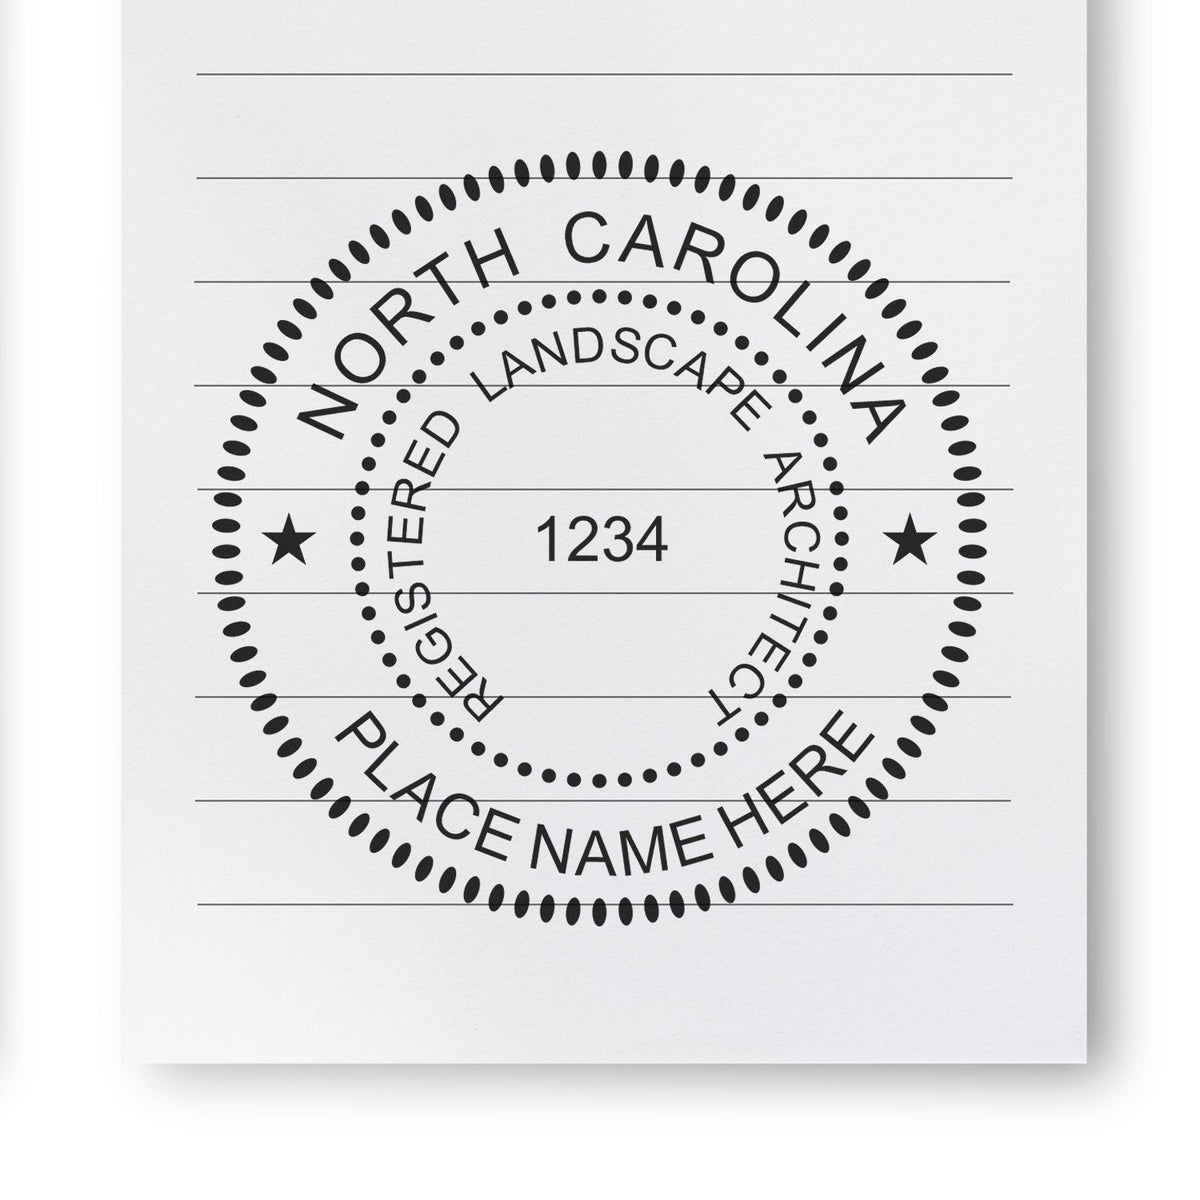 This paper is stamped with a sample imprint of the North Carolina Landscape Architectural Seal Stamp, signifying its quality and reliability.